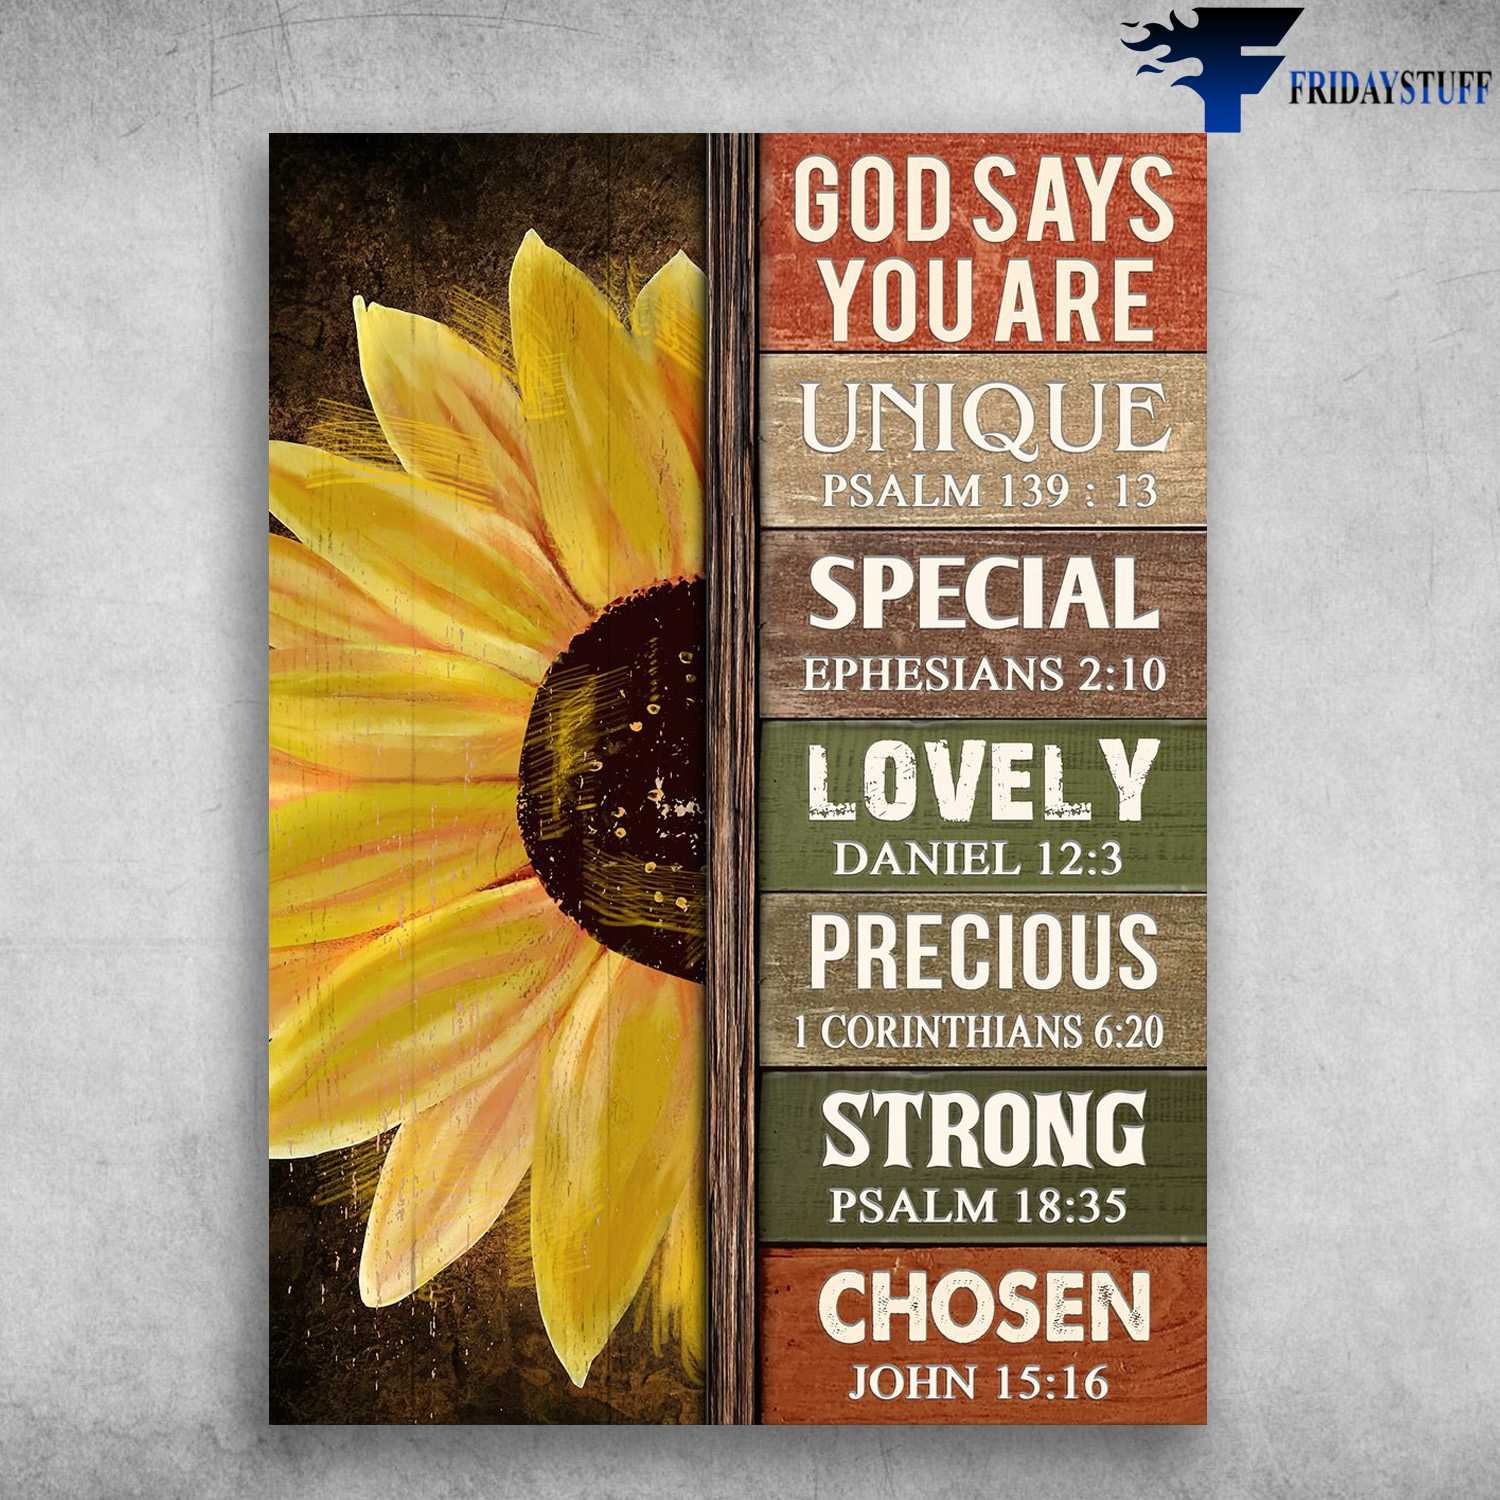 Sunflower Poster - God Says You Are Unique, Special, Lovely, Precious, Strong, Chosen